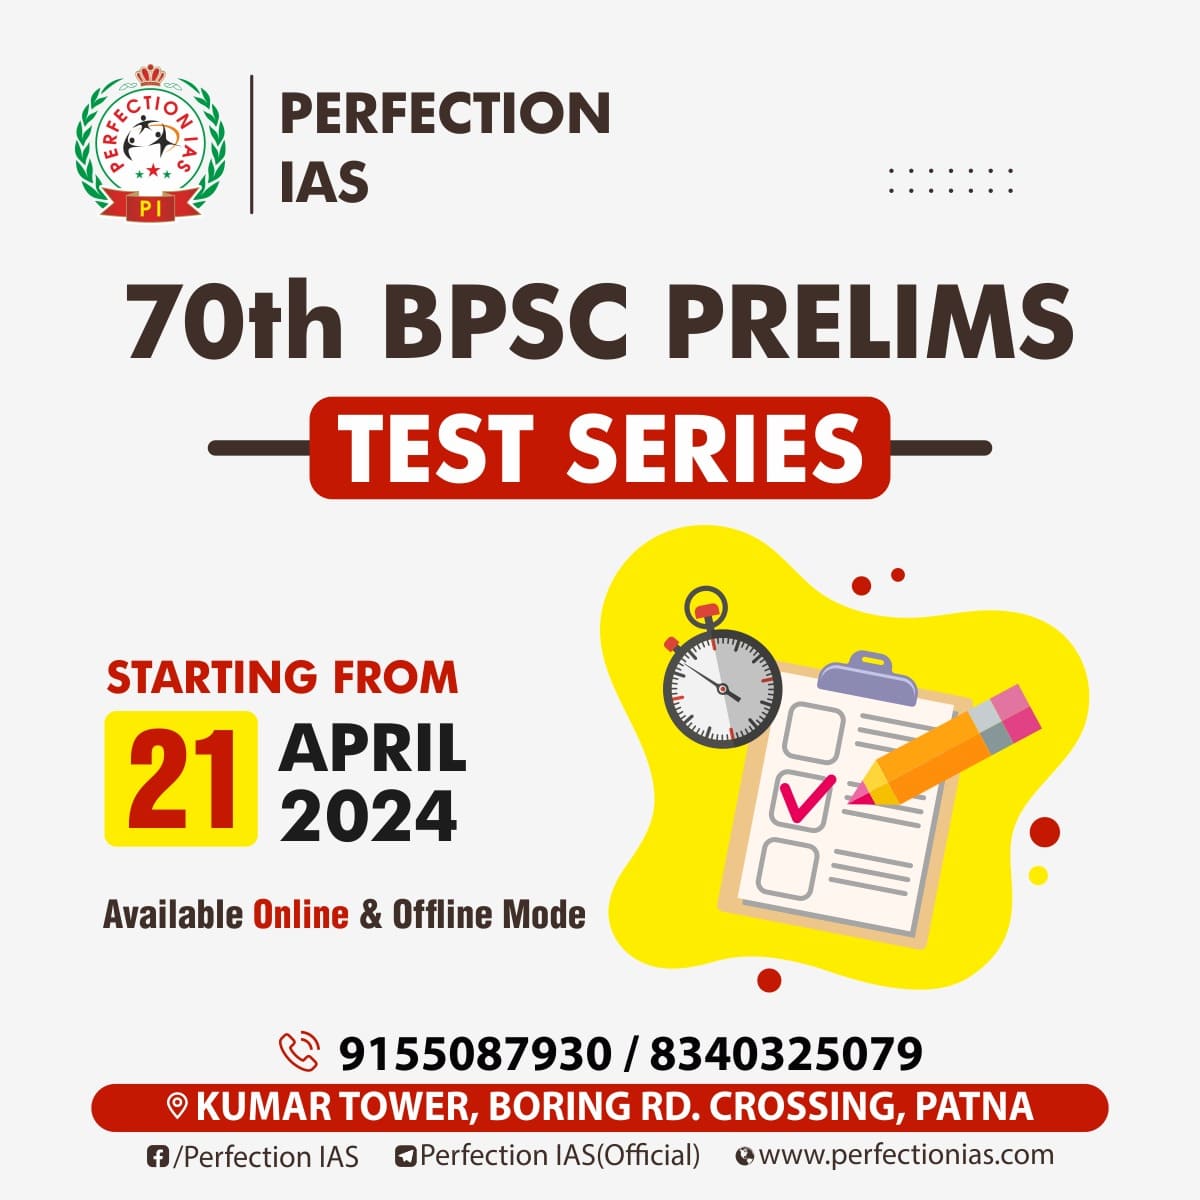 70th BPSC Prelims Test Programme Launched.